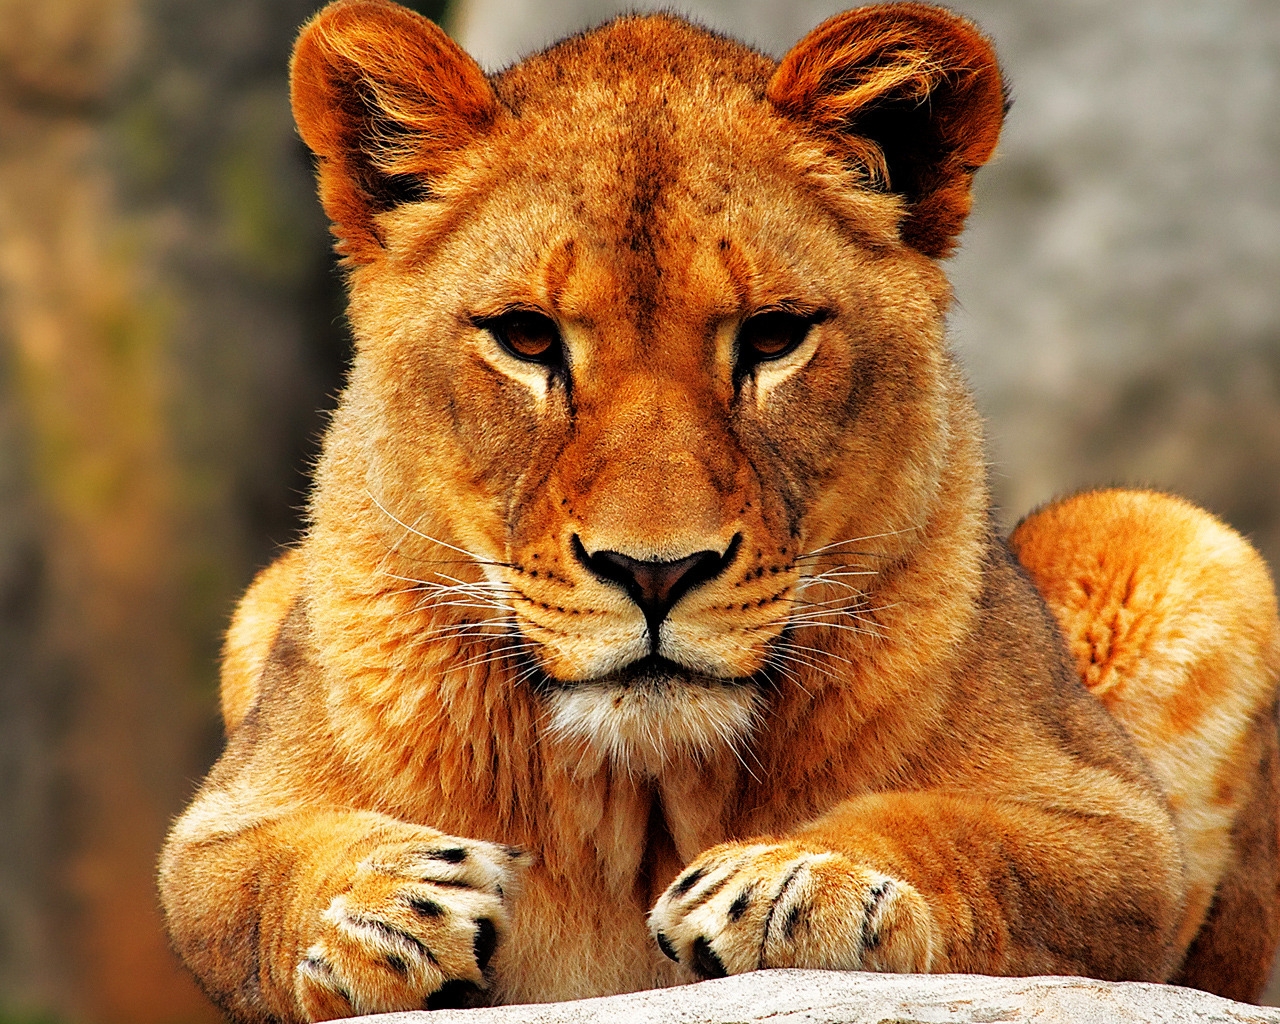 Lion Female for 1280 x 1024 resolution